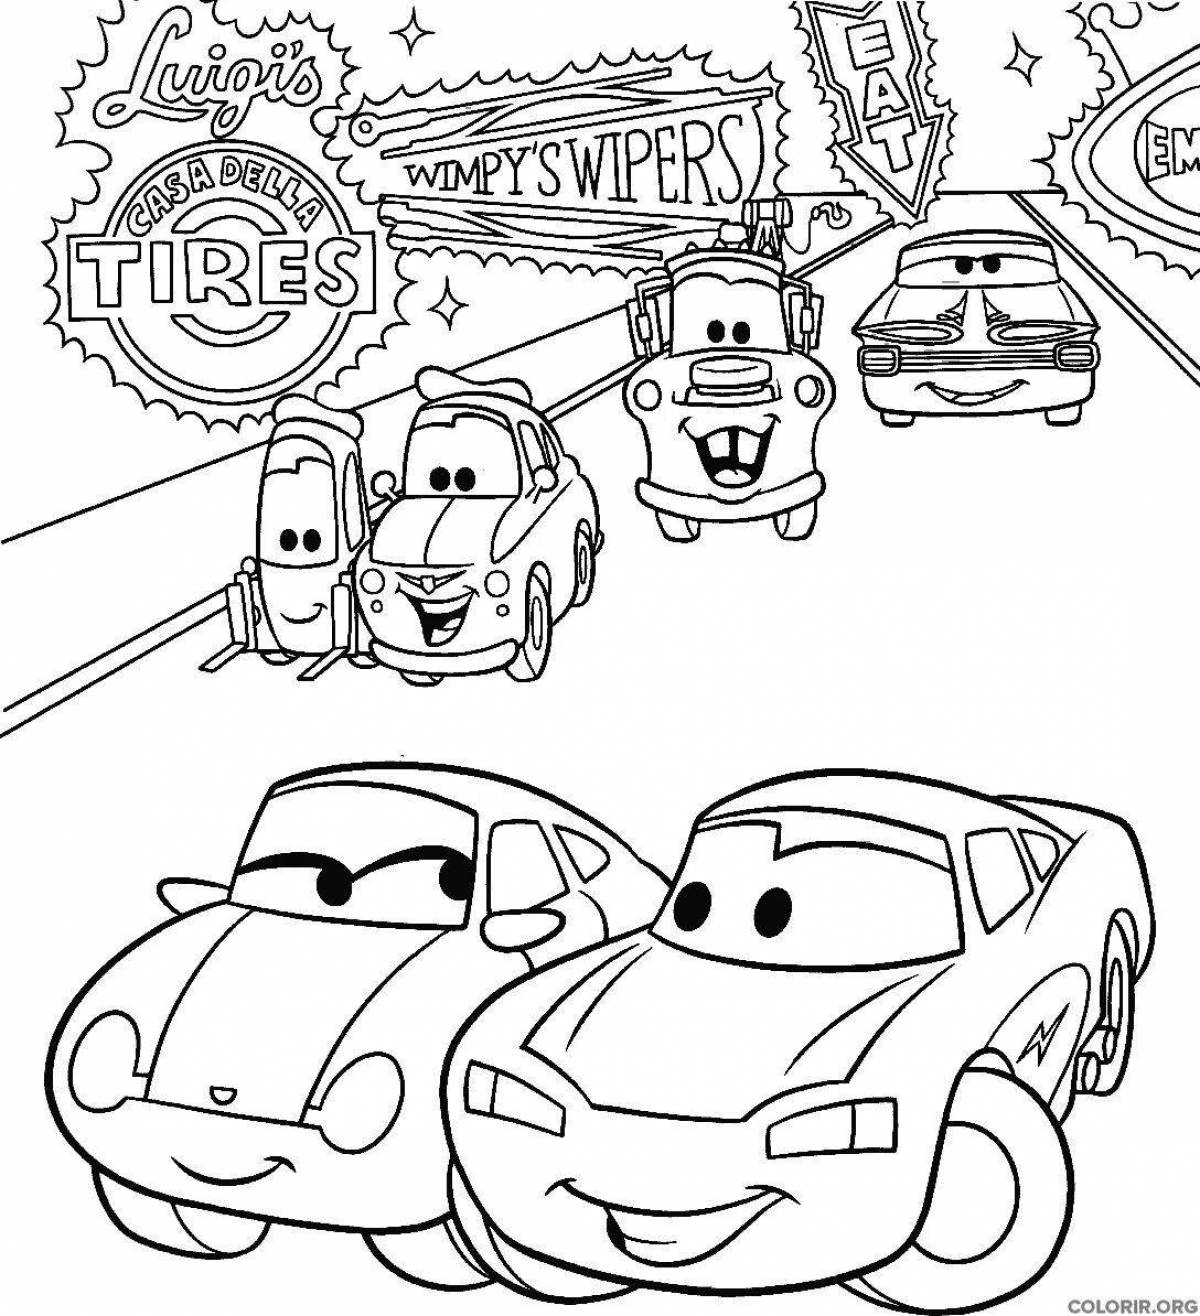 Colorful maqueen coloring page